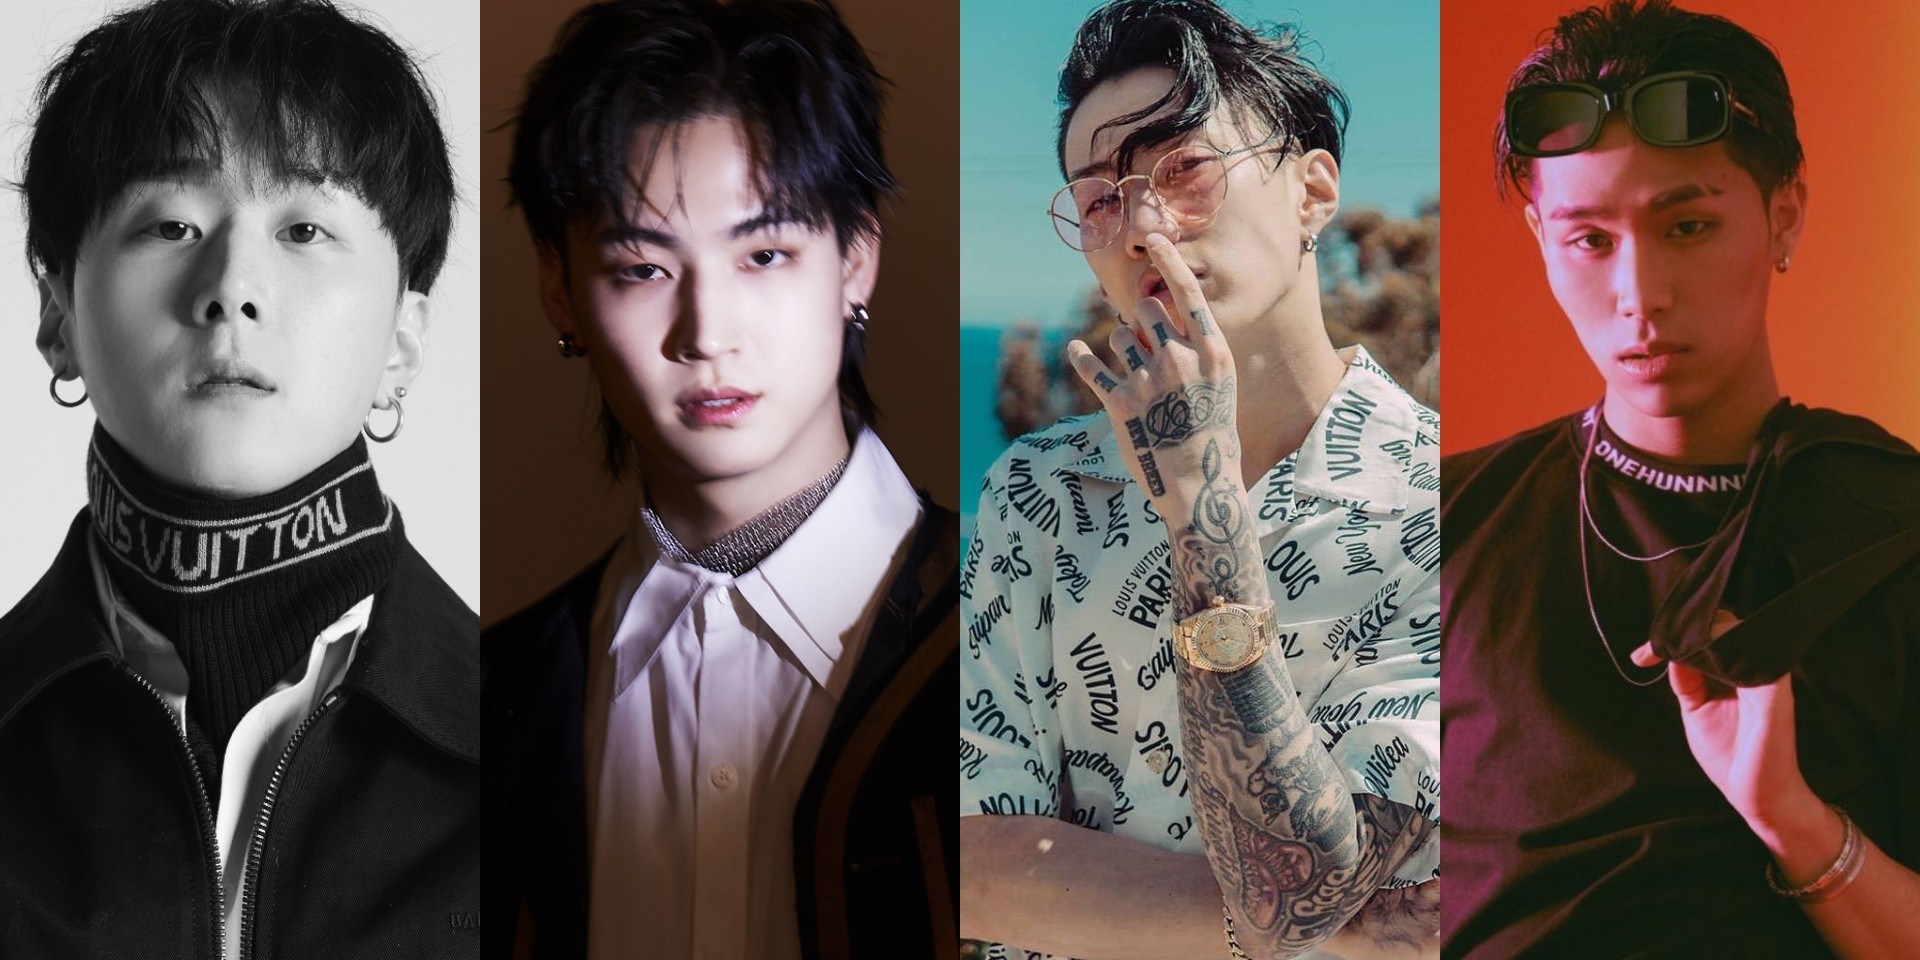 Get to know the artists behind H1GHR MUSIC – Jay Park, pH-1, SiK-K, JAY B, and more